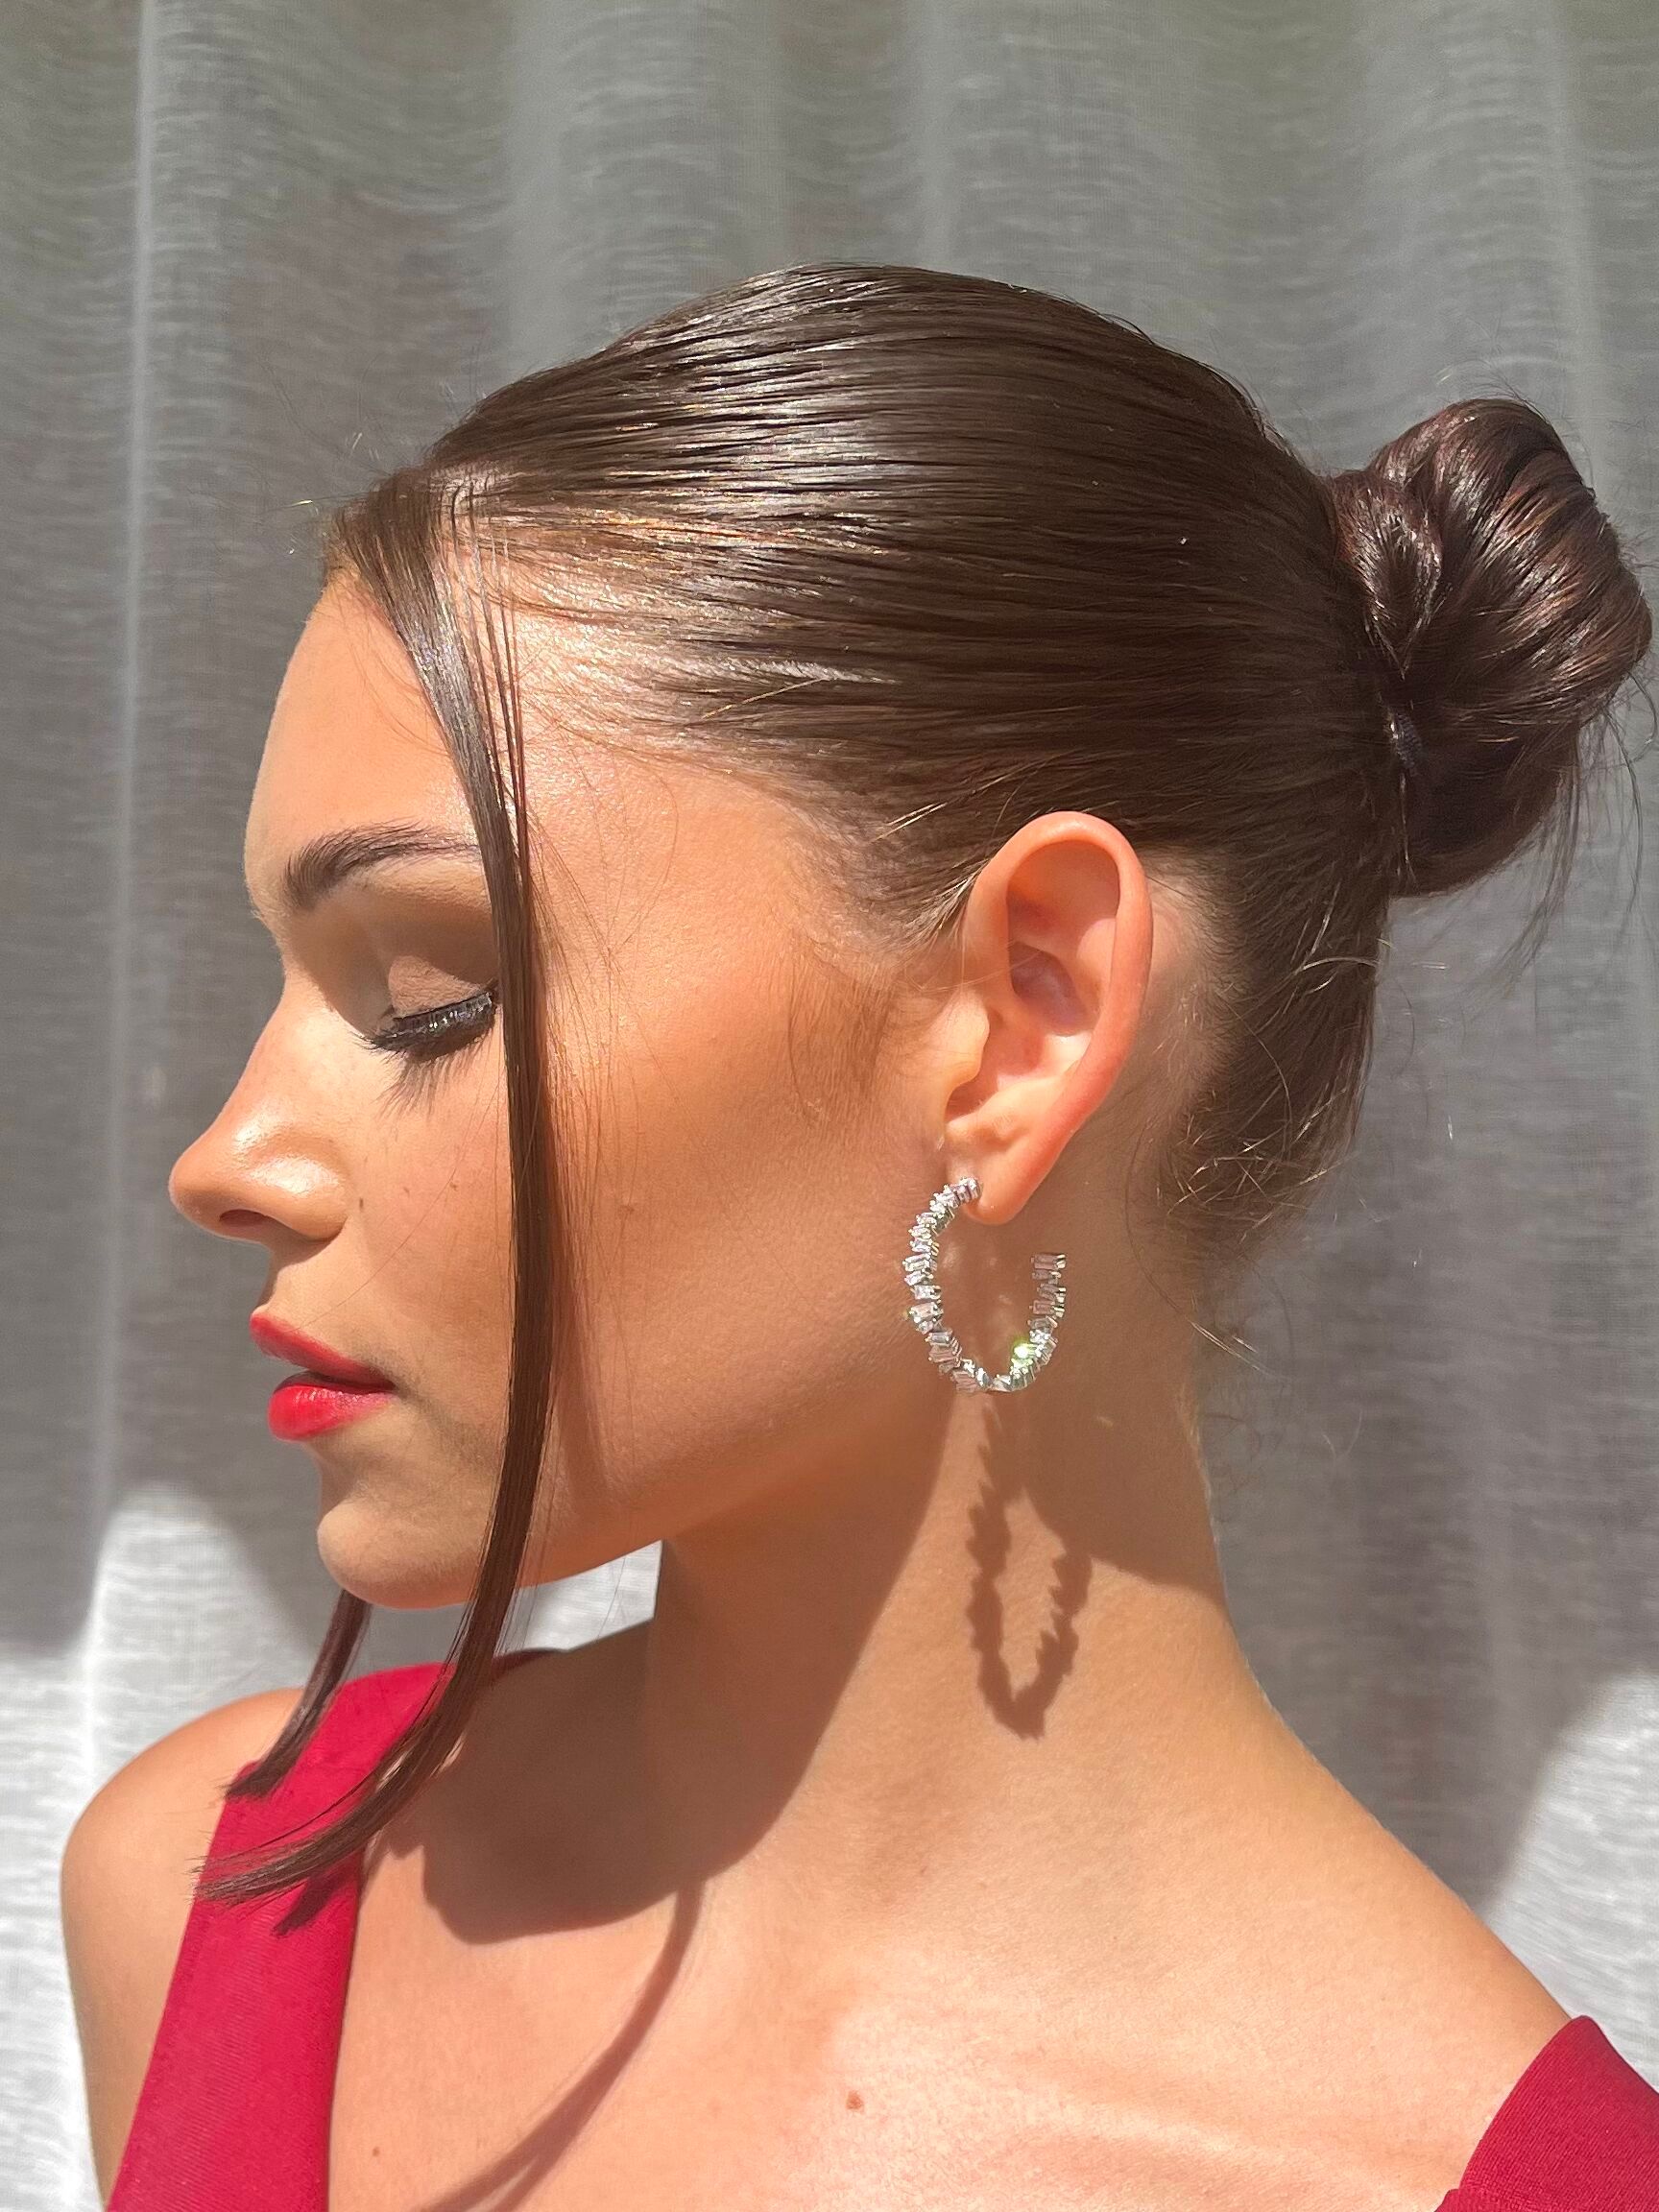 Lizzie, The Fun of Scrunchies, & The Power of Hoop Earrings - The POWER  Thread